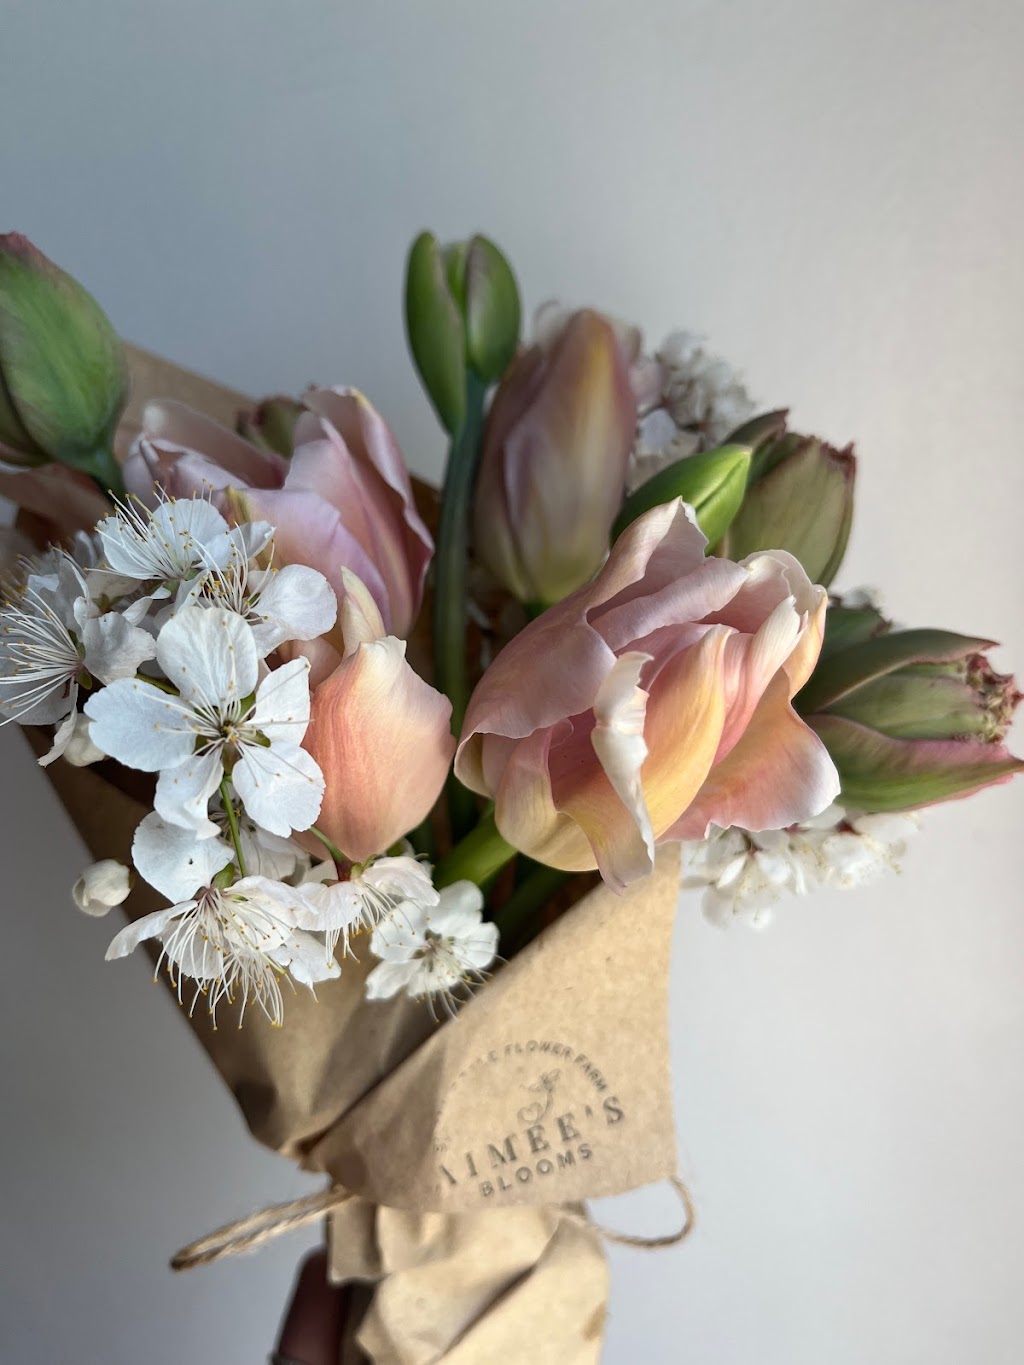 Aimees Blooms | 3583 Ch. Old Montréal Rd, Cumberland, ON K4C 1C8, Canada | Phone: (613) 857-8985